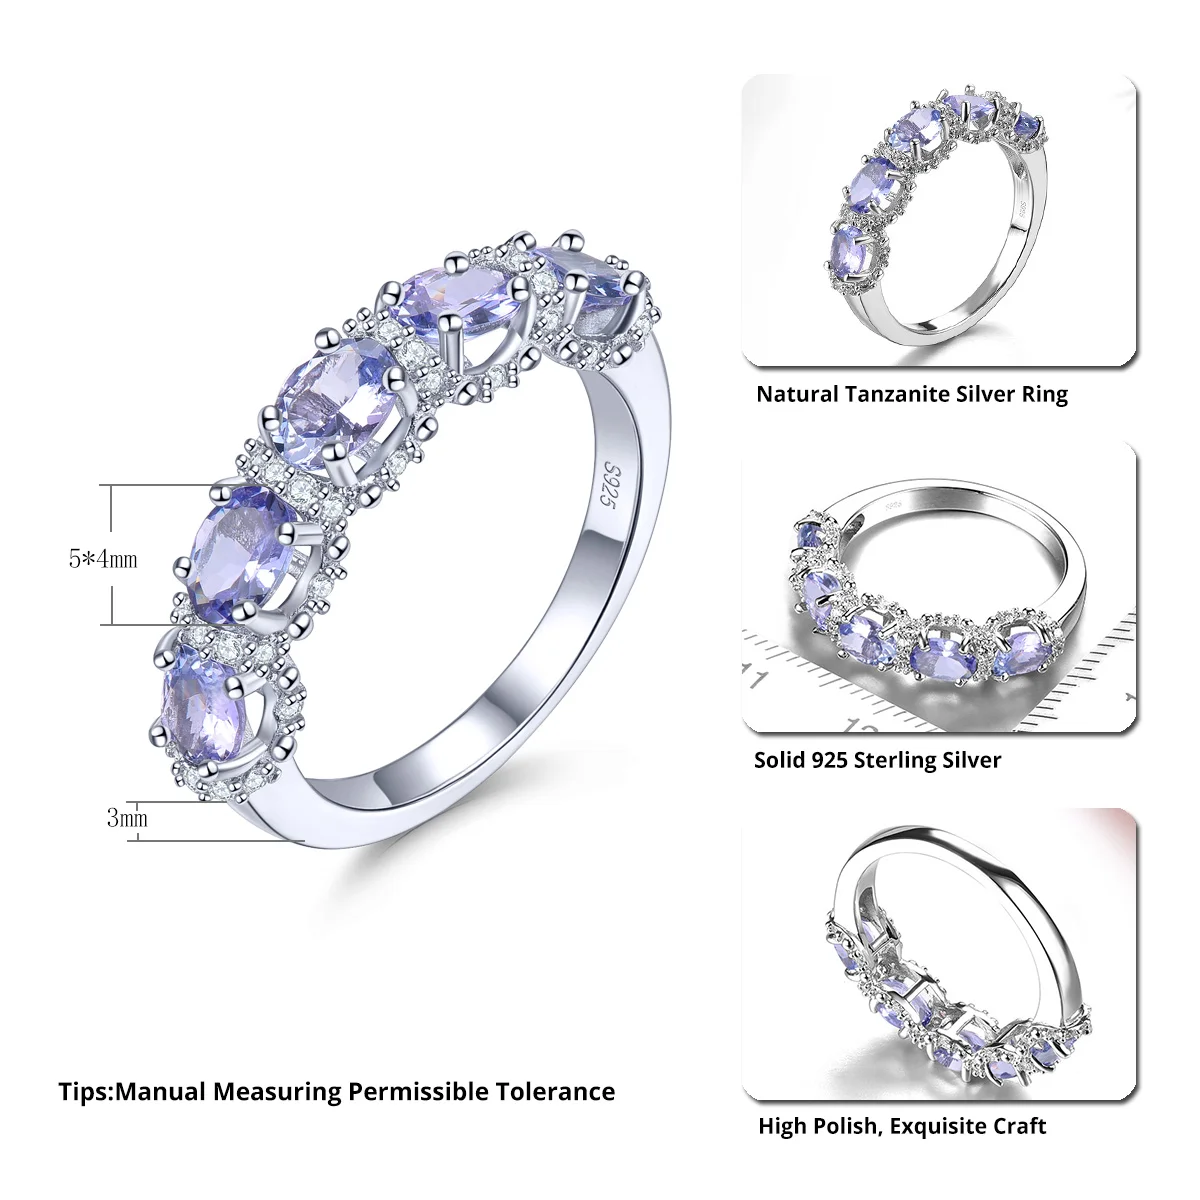 Natural Tanzanite Silver Rings 1.8 Carat Faced Cut Tanzanite Gemstone Jewelry Elegant Classic Style S925 New Year Gifts